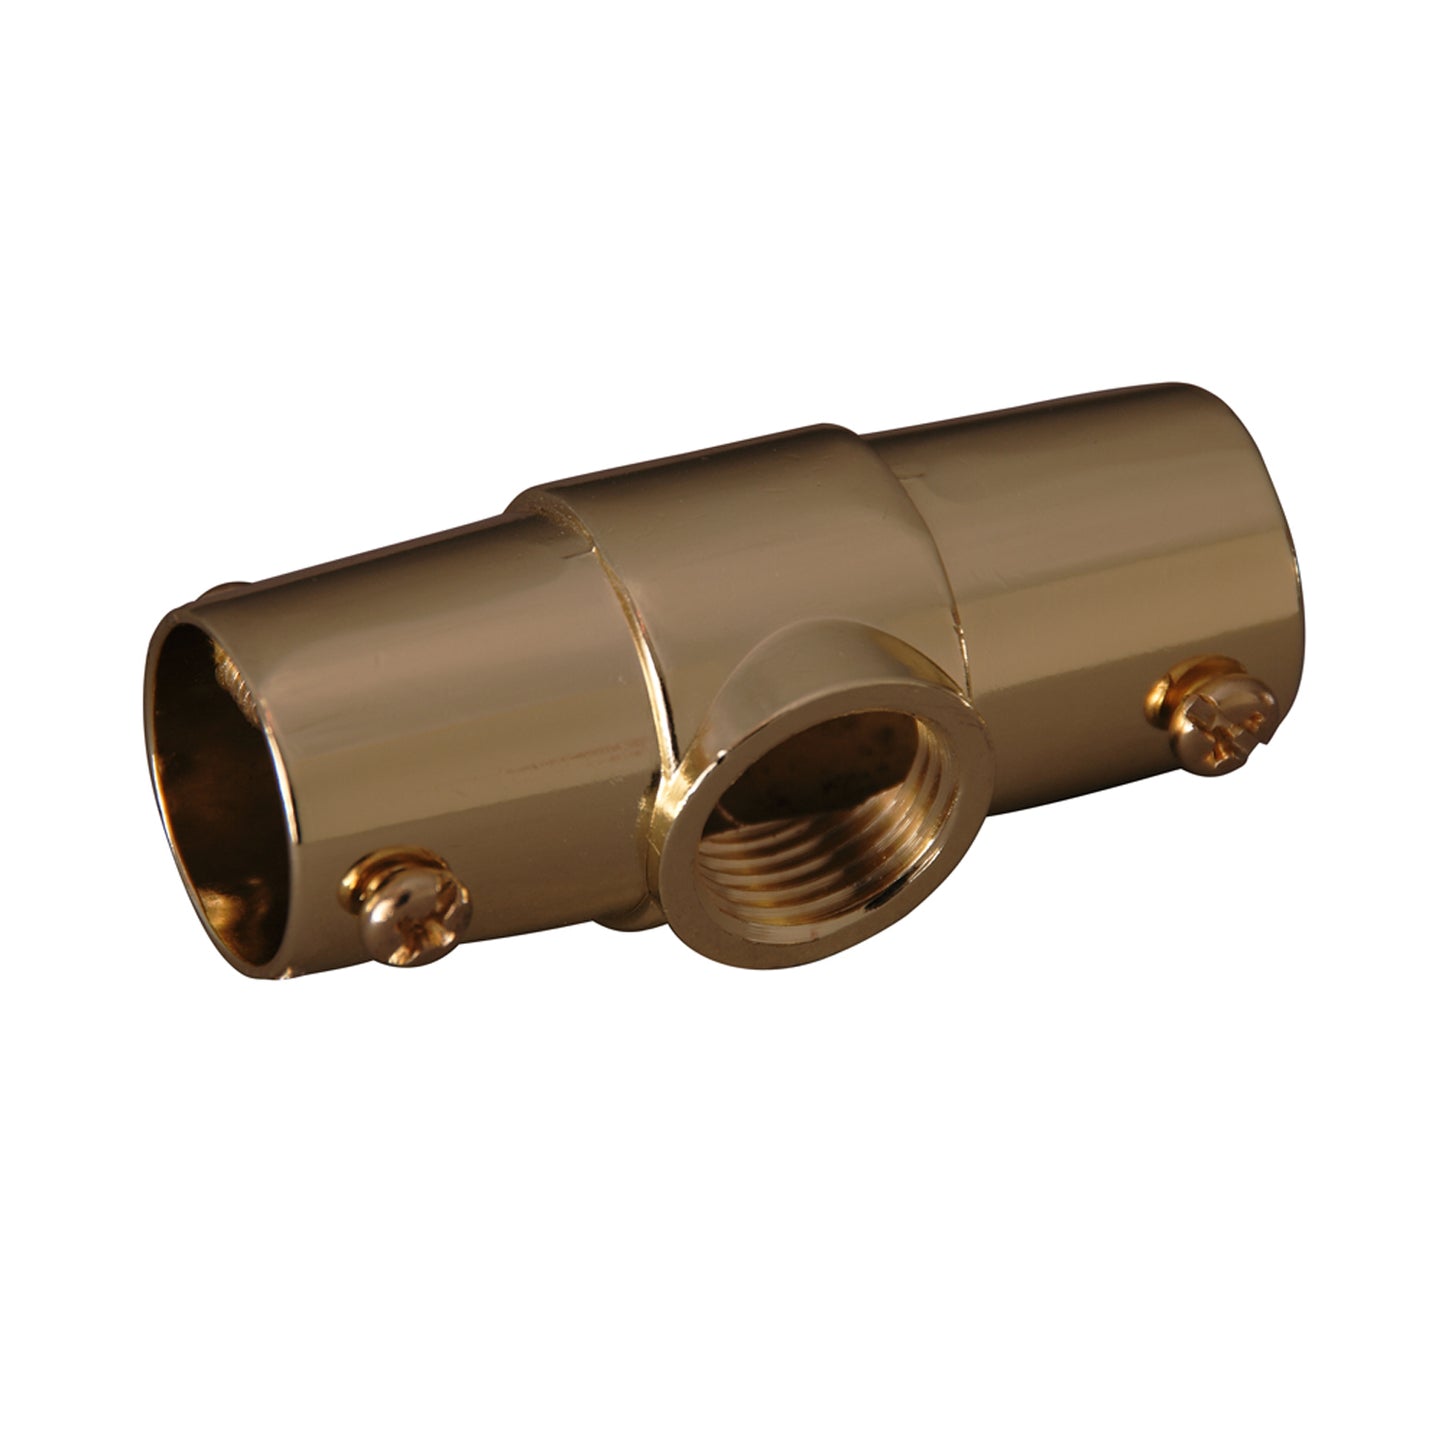 Ceiling Tee for 4150 Rod Polished Brass